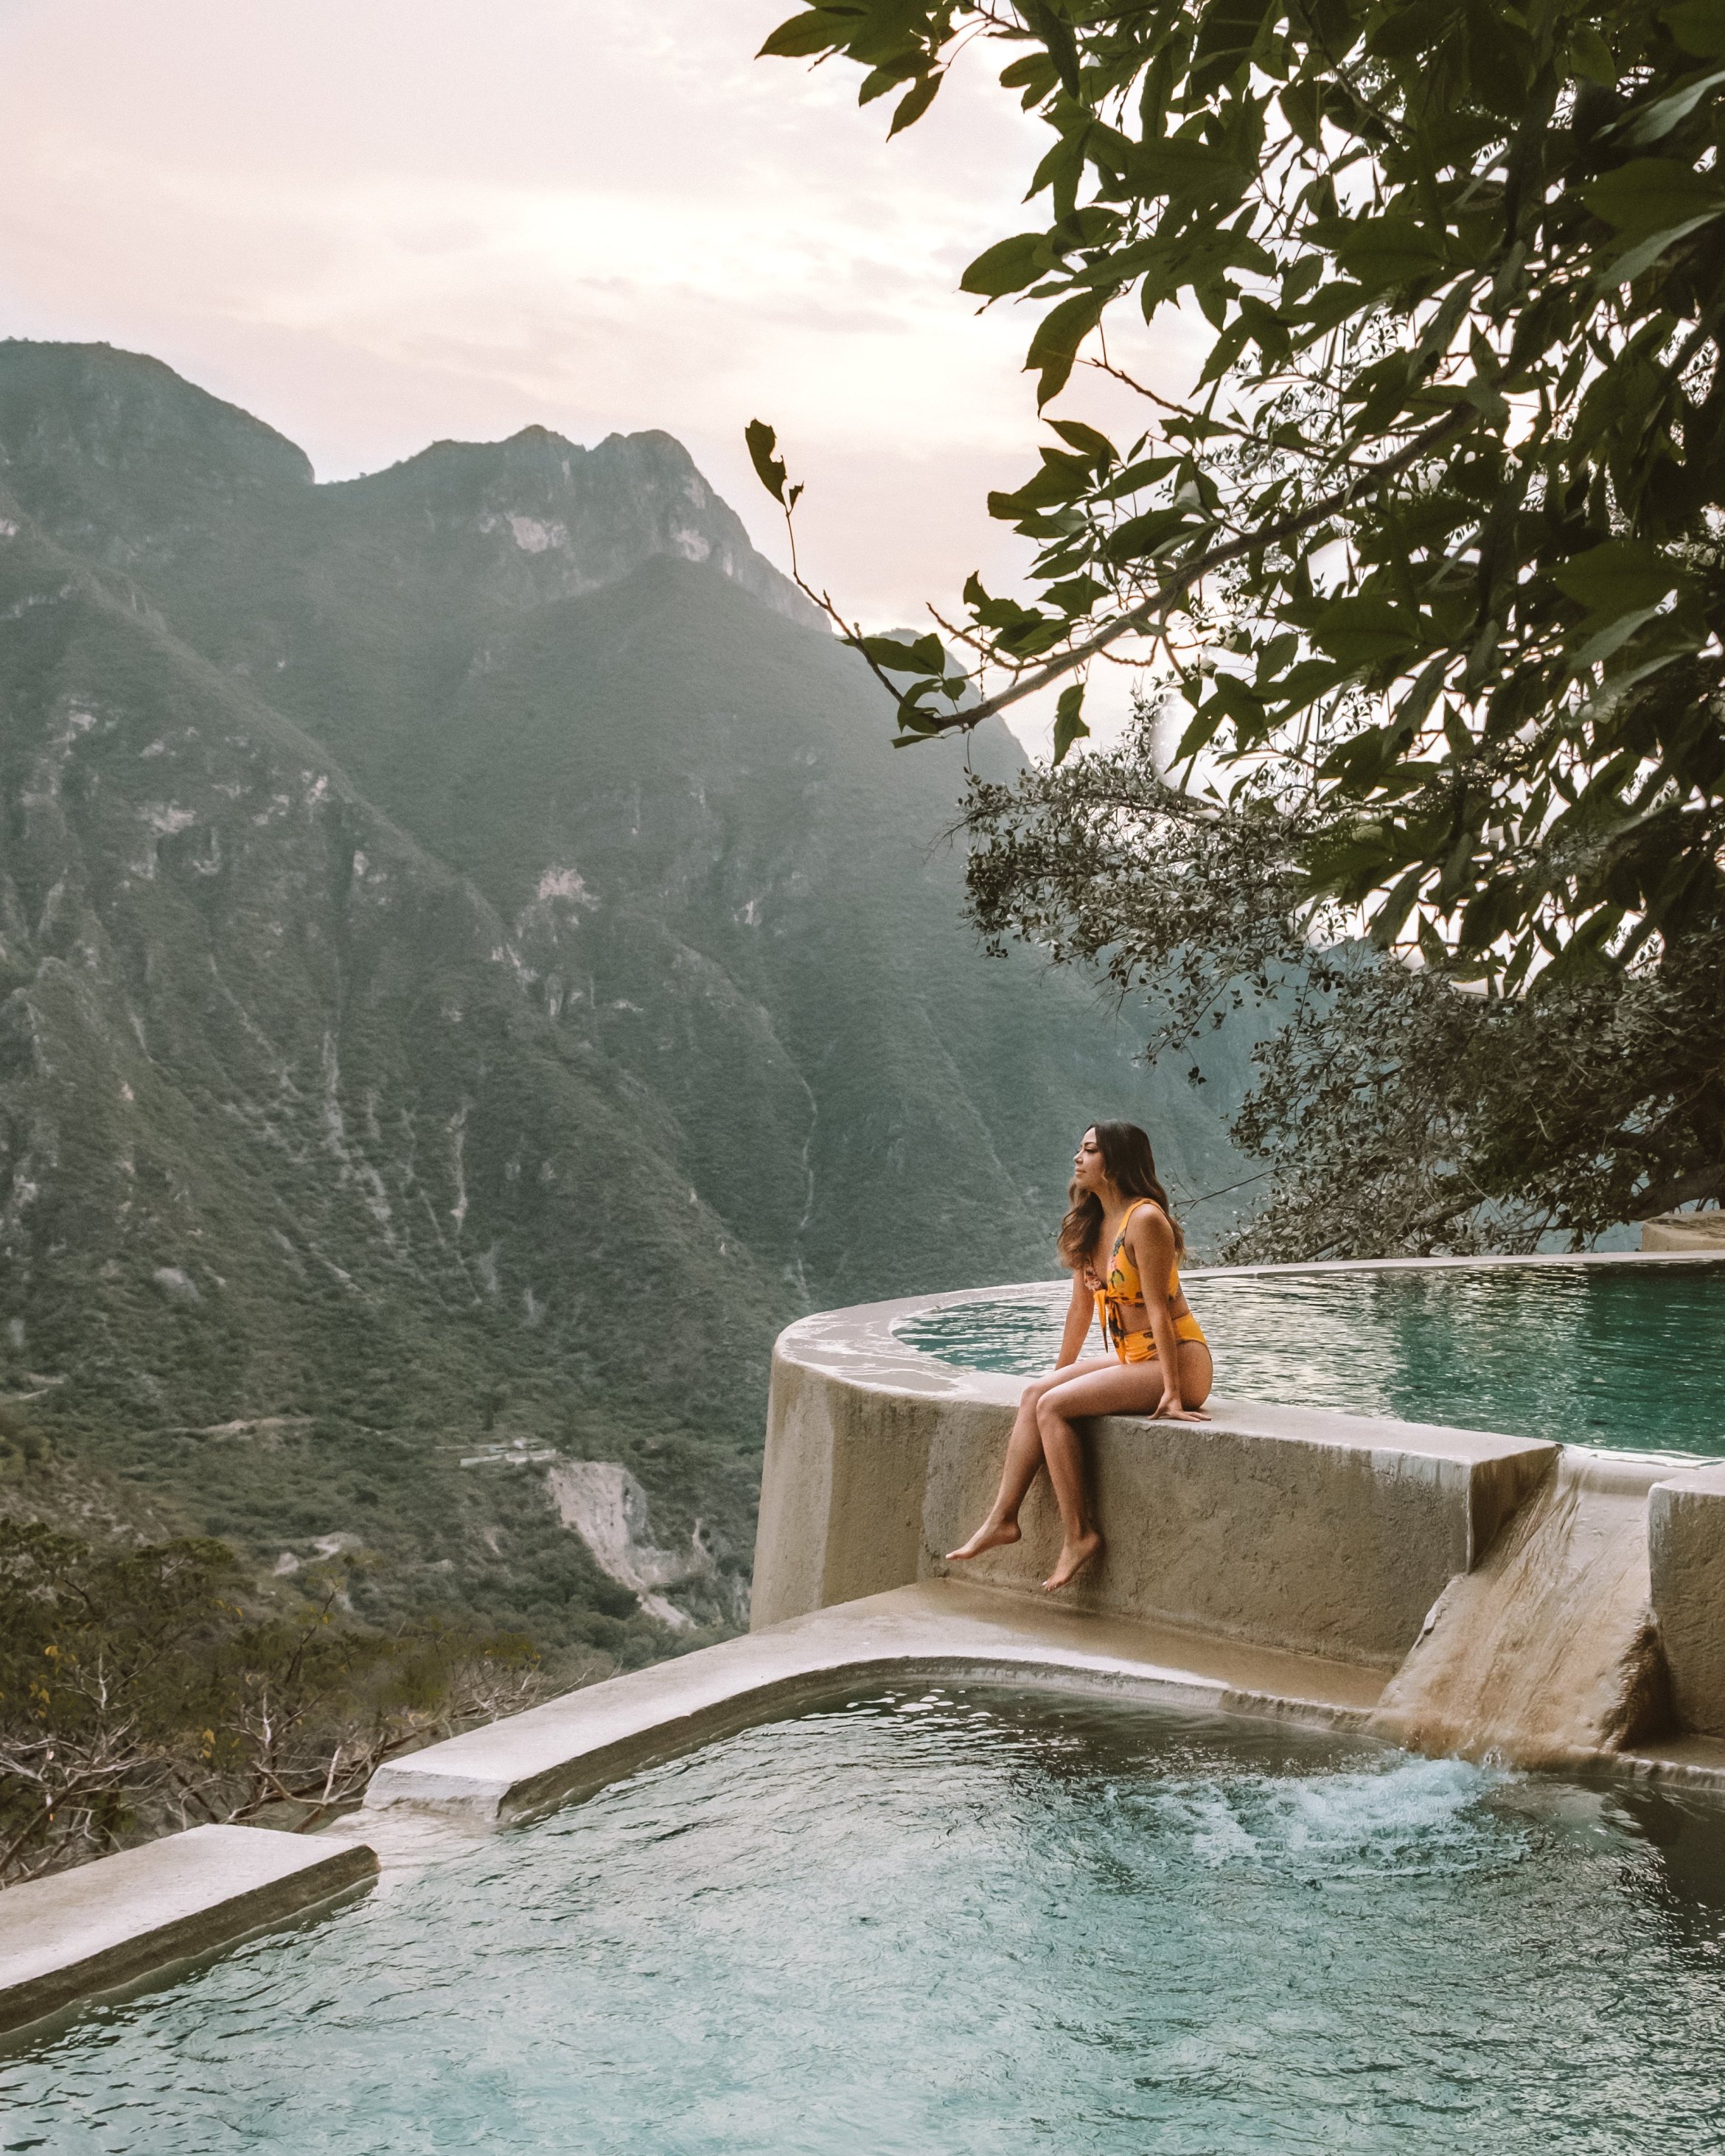 The bathing pools at Grutas Tolantongo are perfect for relaxing as it offers river and mountain views.  Although they are man-made products, they harmonize perfectly with their surroundings.  Photo: @cindyycheeks